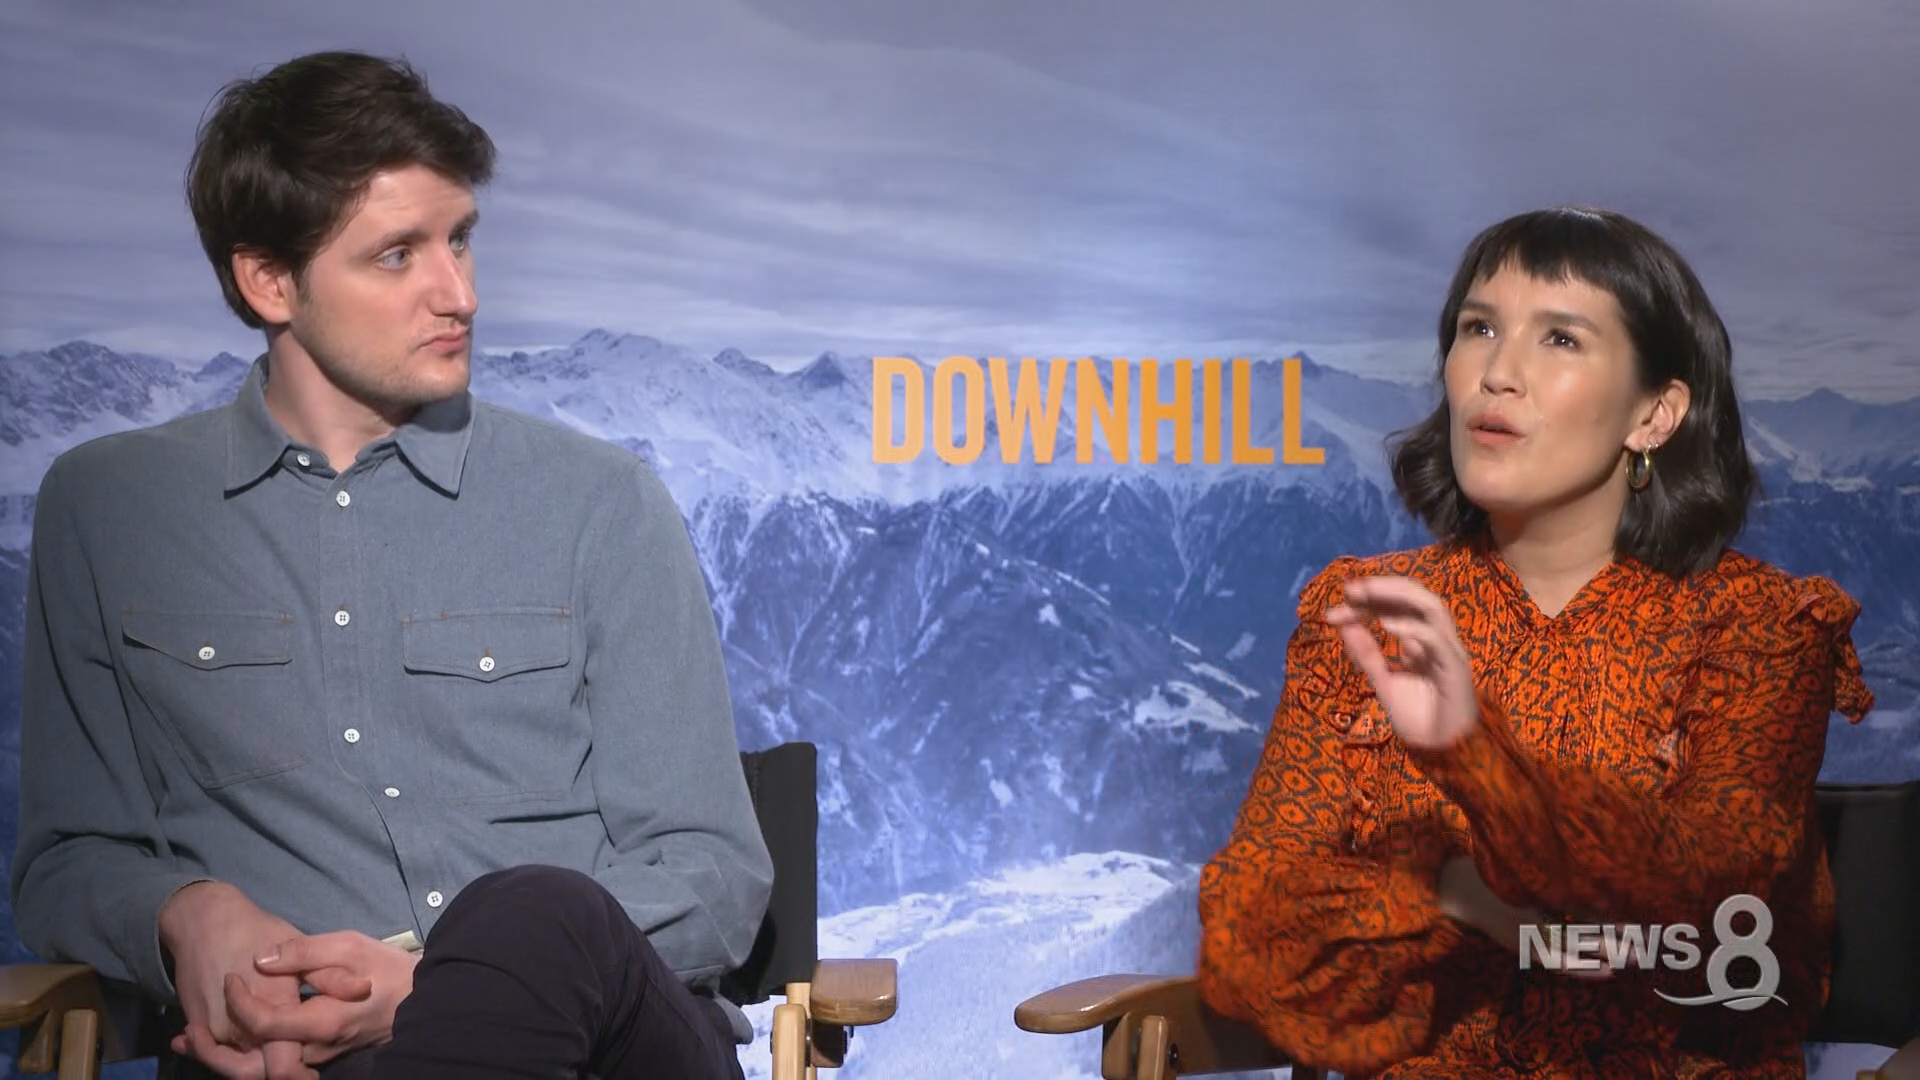 Kelli Gillespie sat down with the duo to talk about having a front seat to the best scene in the movie and what it was like shooting on location.